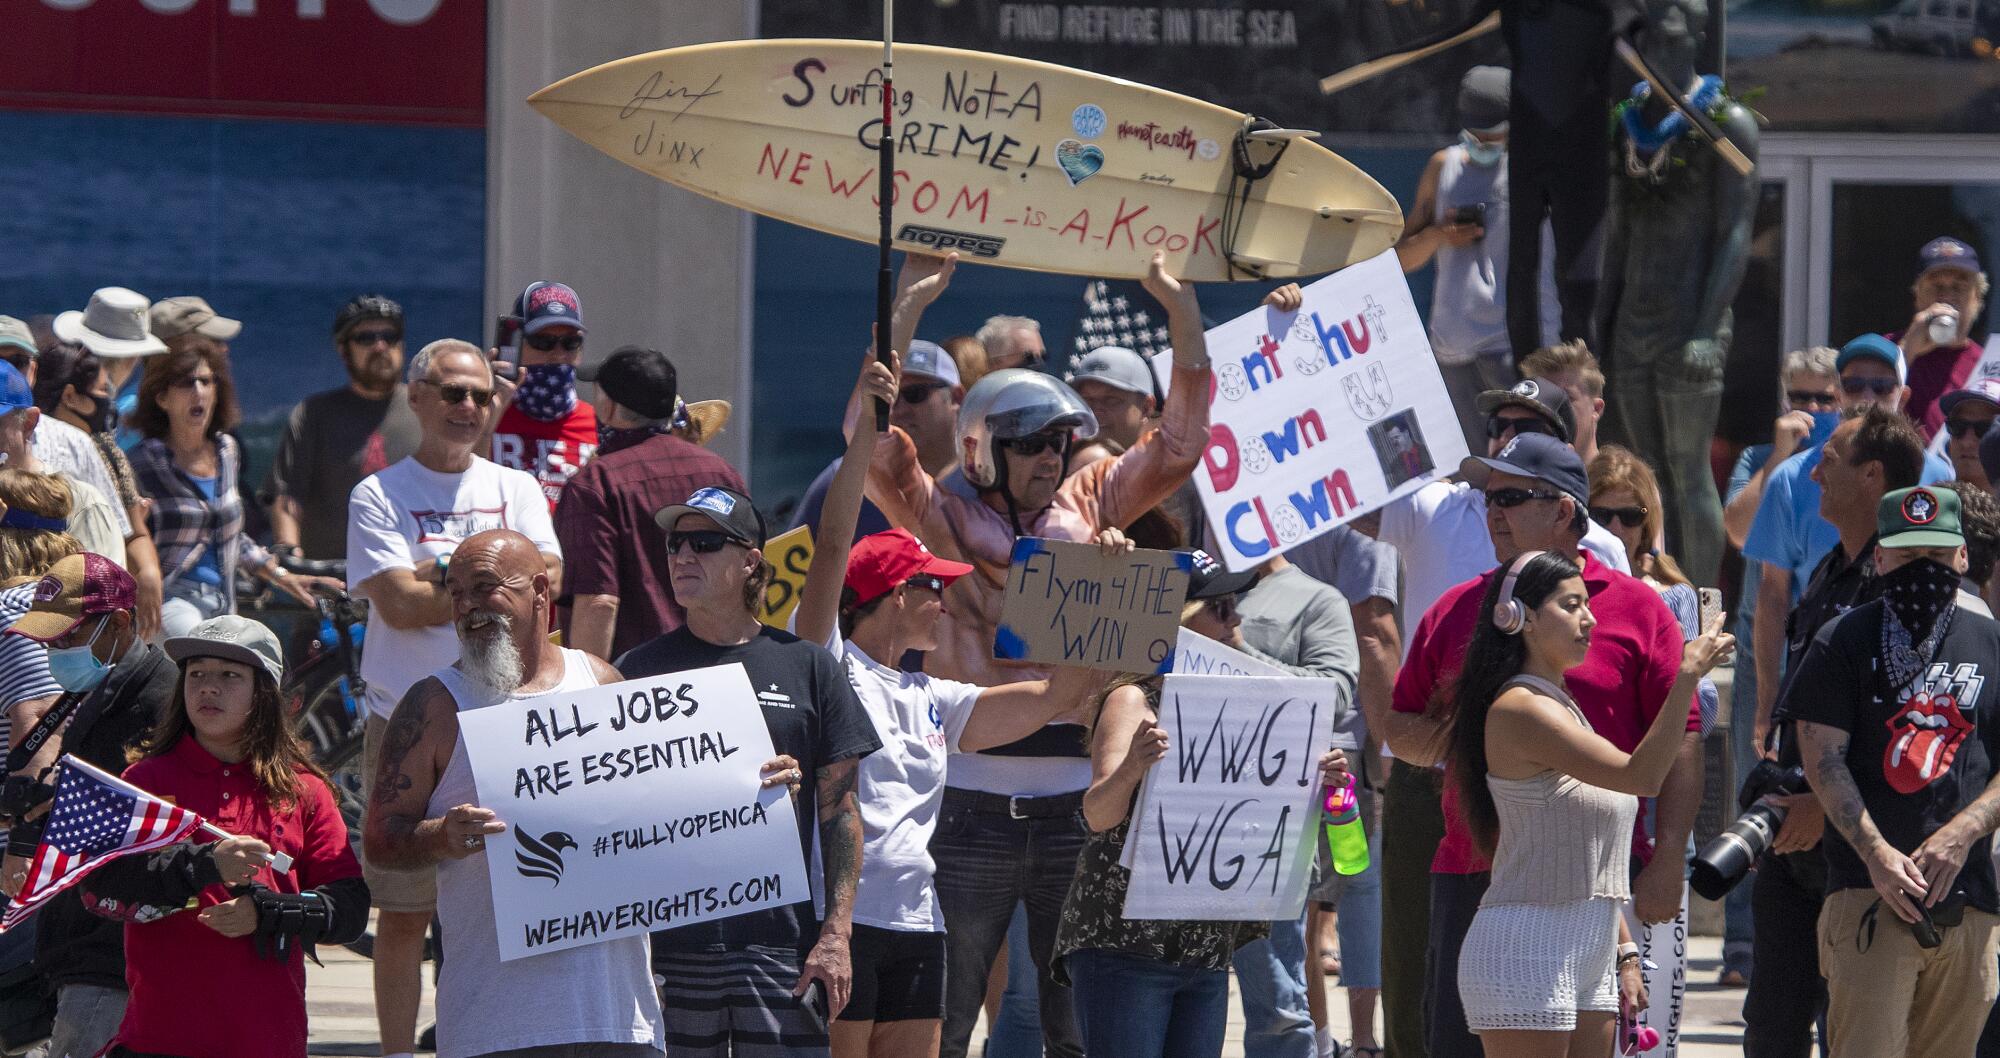 Protesters at Huntington Beach on Friday demand stay-at-home rules be lifted